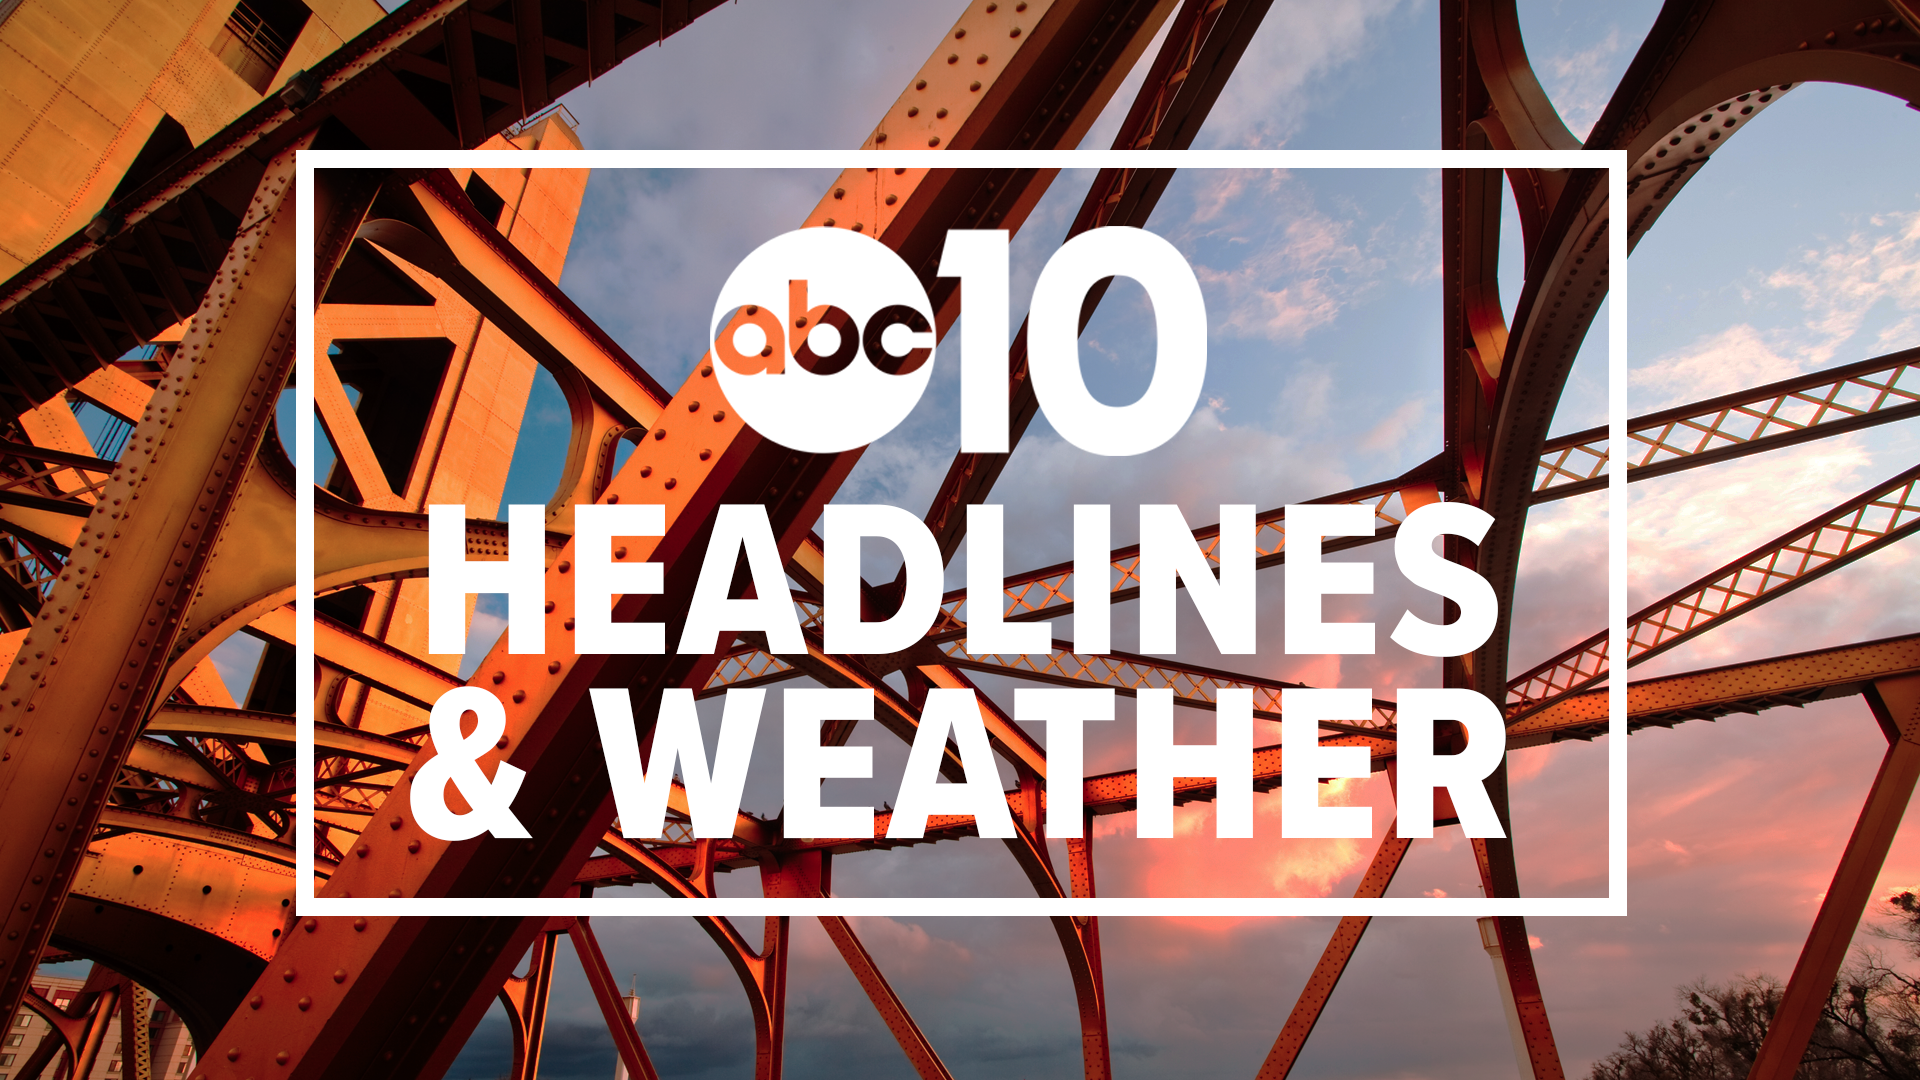 Evening Headlines: July 21, 2019 | Catch in-depth reporting on #LateNewsTonight at 11 p.m. | The latest Sacramento news is always at www.abc10.com